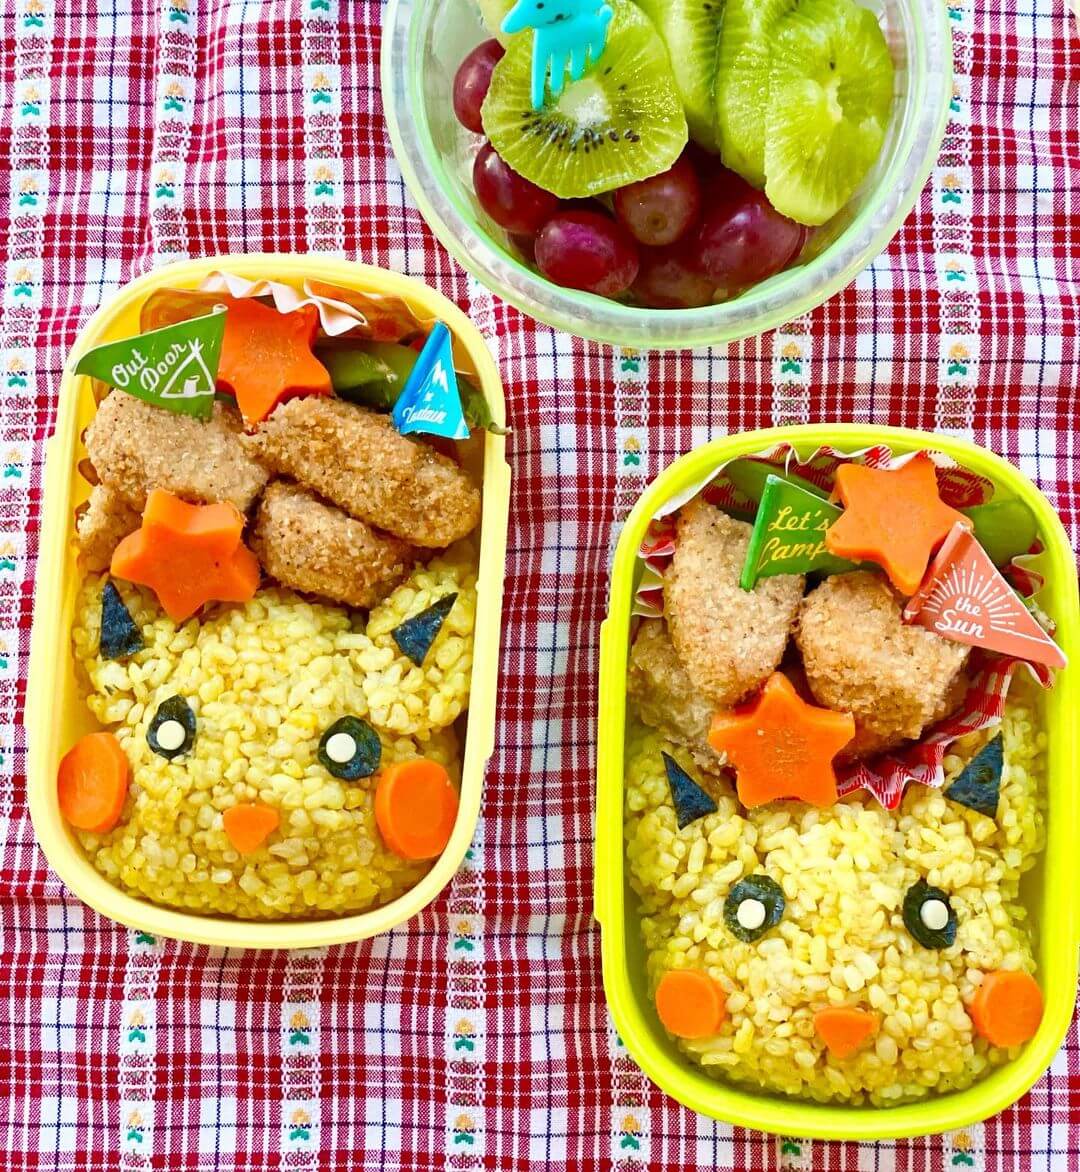 248252546 1031827280692871 2588426790430554599 n Vegan Bento Box Ideas for Your Kids’ Lunches